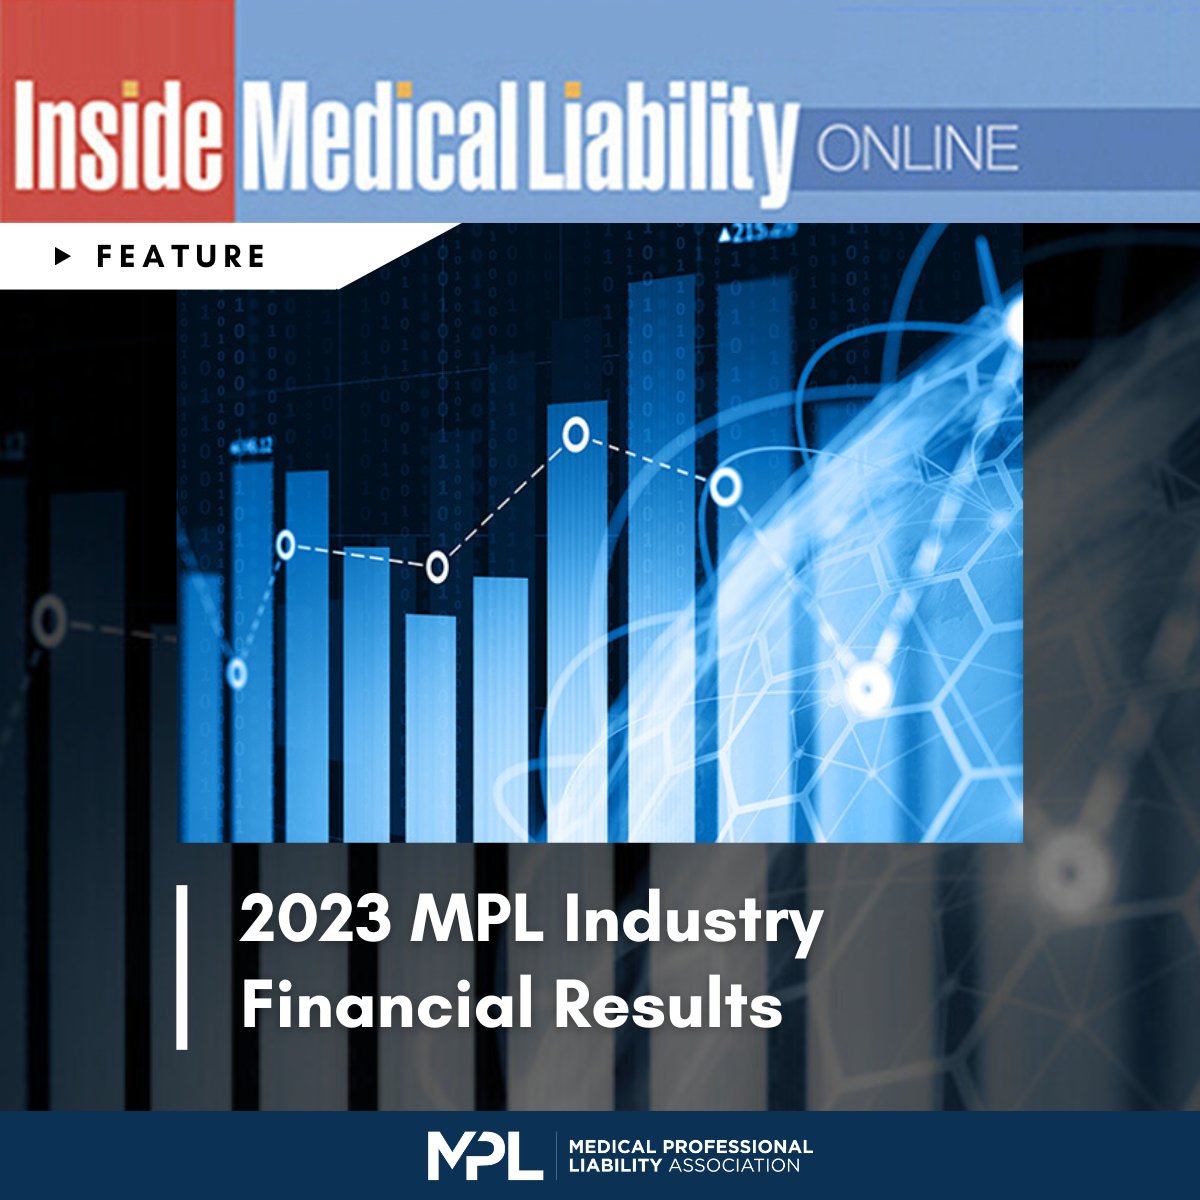 According to a look at the 2023 financial results for the MPL sector from @millimaninsight, frequency continues to hold severity in check…for now. Authors say that the trajectory of 2023 was similar to 2022 for the medical professional liability industry. bit.ly/3VlYdIr